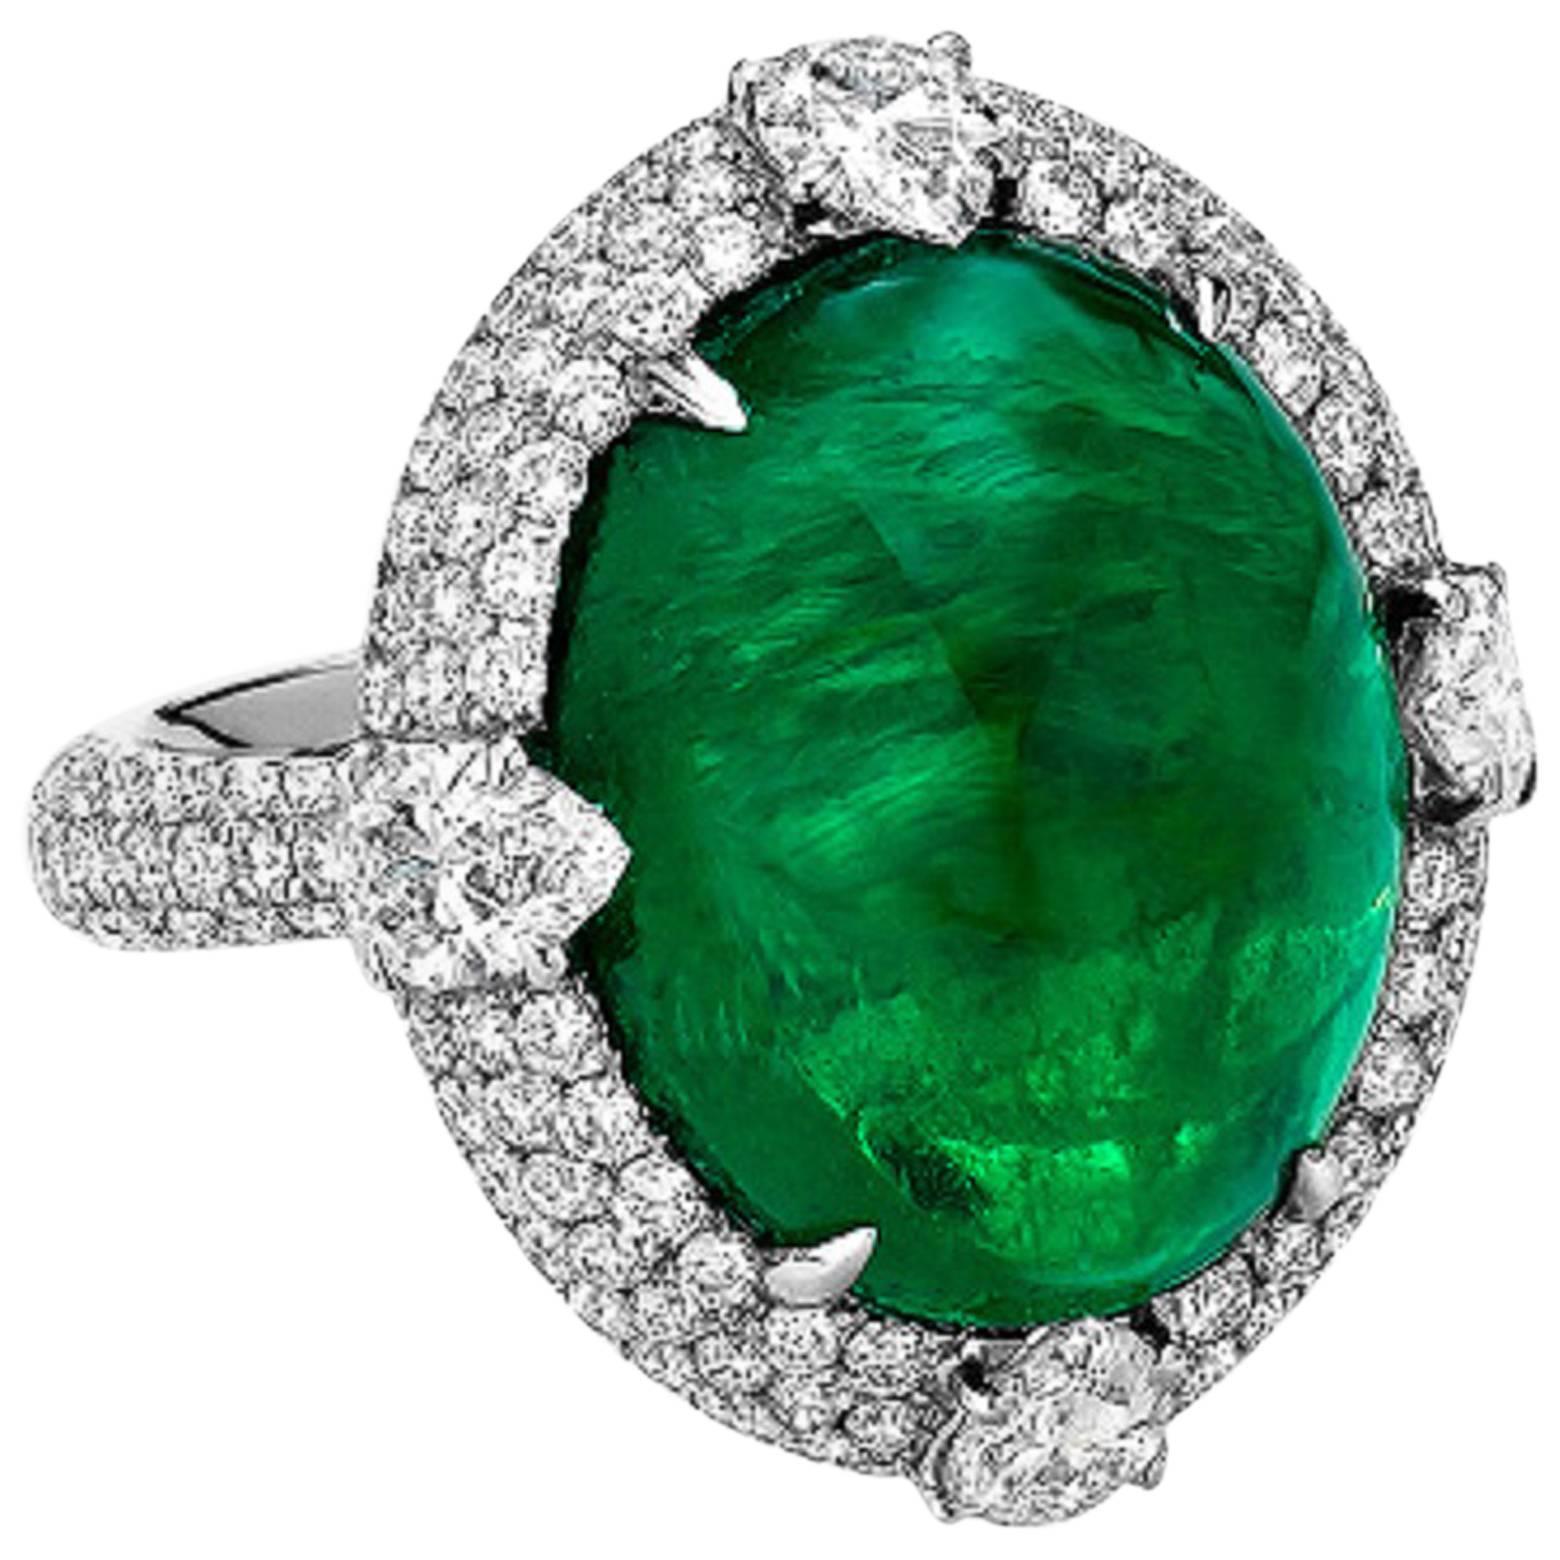 17.41 Carat Green Oval Emerald Flanked by Fancy Shaped Diamonds